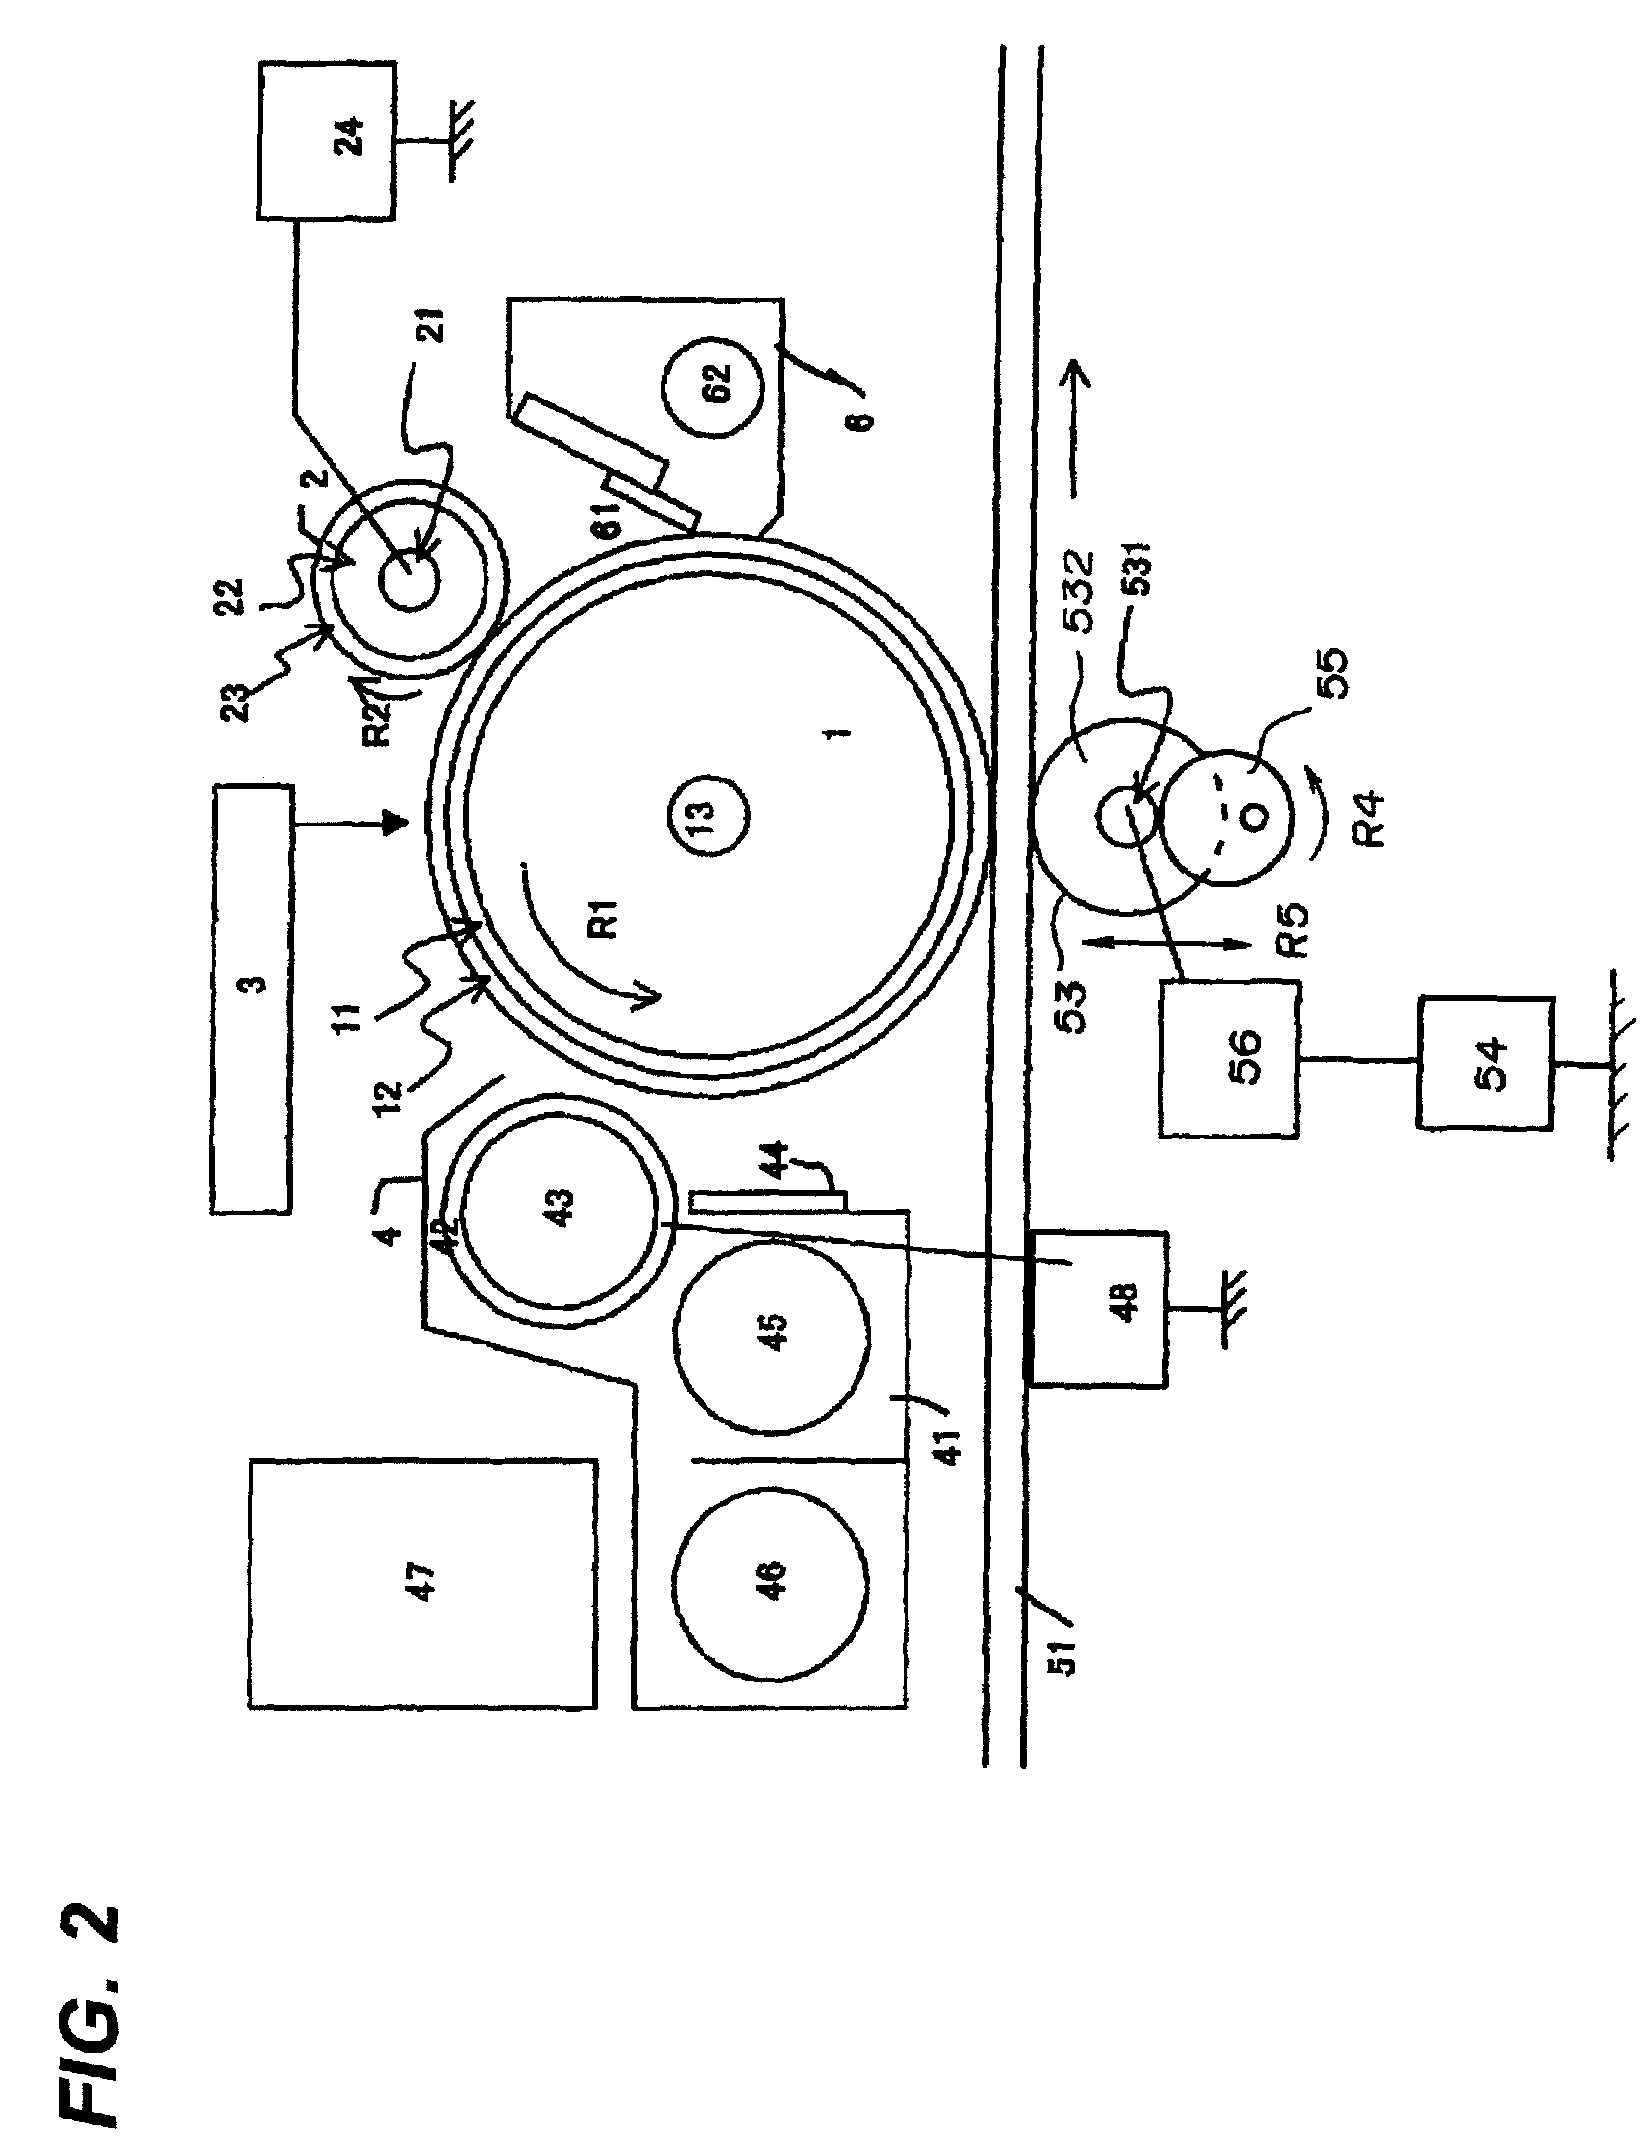 Image forming apparatus with multiple image forming portions and image transfers